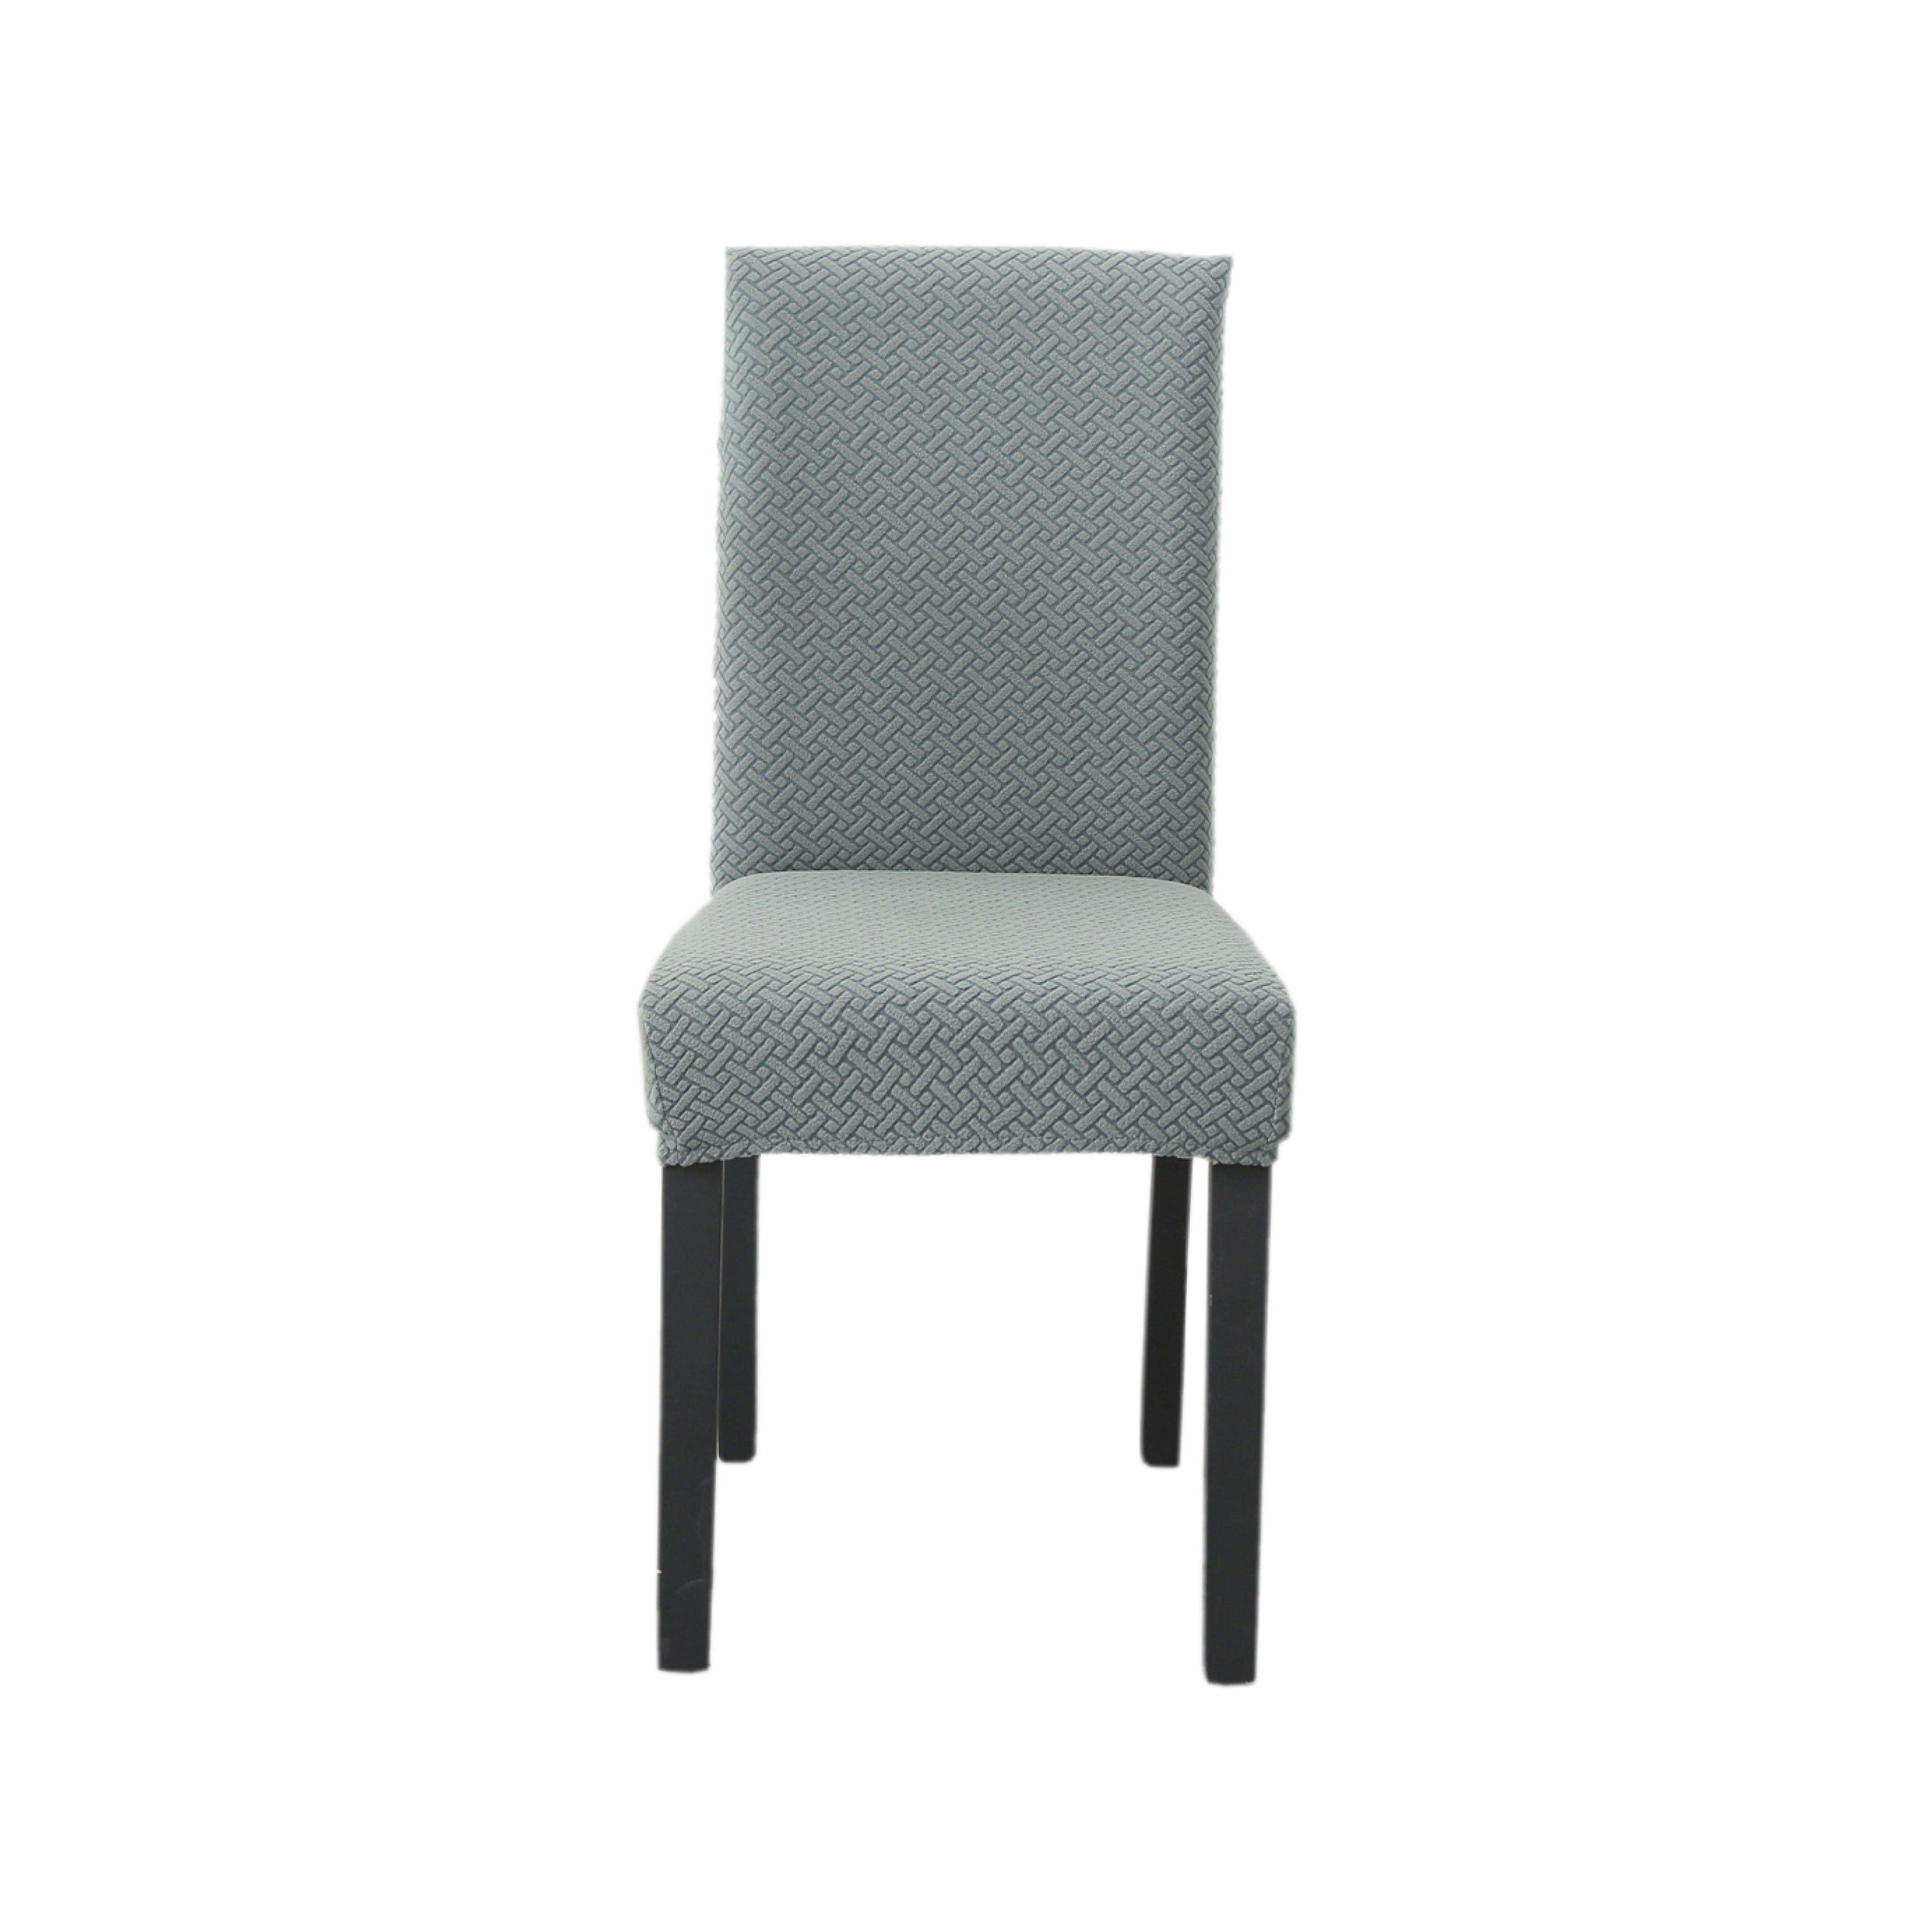 Hyper Cover Jacquard Dining Chair Covers Emerald | Chair Covers | Brilliant Home Living